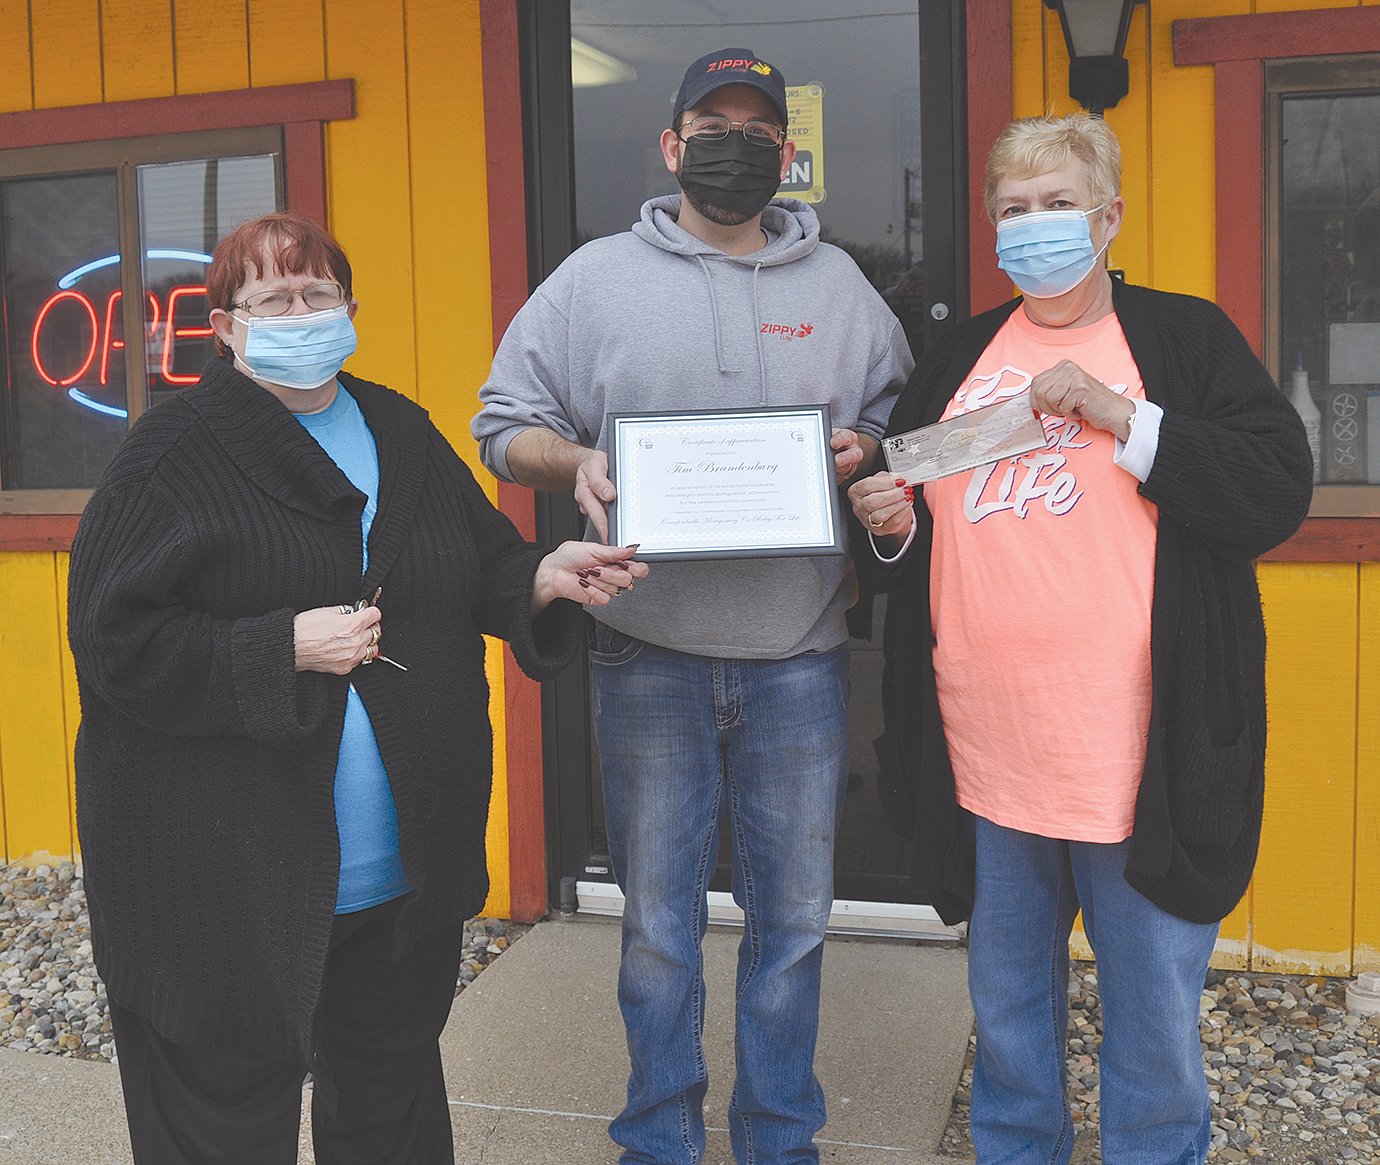 Becky Hankins, left, and Cindy Biddle, right, representing Montgomery County Relay for Life, present Tim Brandenburg of Zippy Lube with a certifcate of appreciation. During the months of November and December, retailer at 707 Englewood Drive, donated $1 from every oil change to the American Cancer Society. Businesses interested in assisting the ACS and the Montgomery County Relay for Life should email cynthiabid@gmail.com. The annual relay is scheduled for July 17.